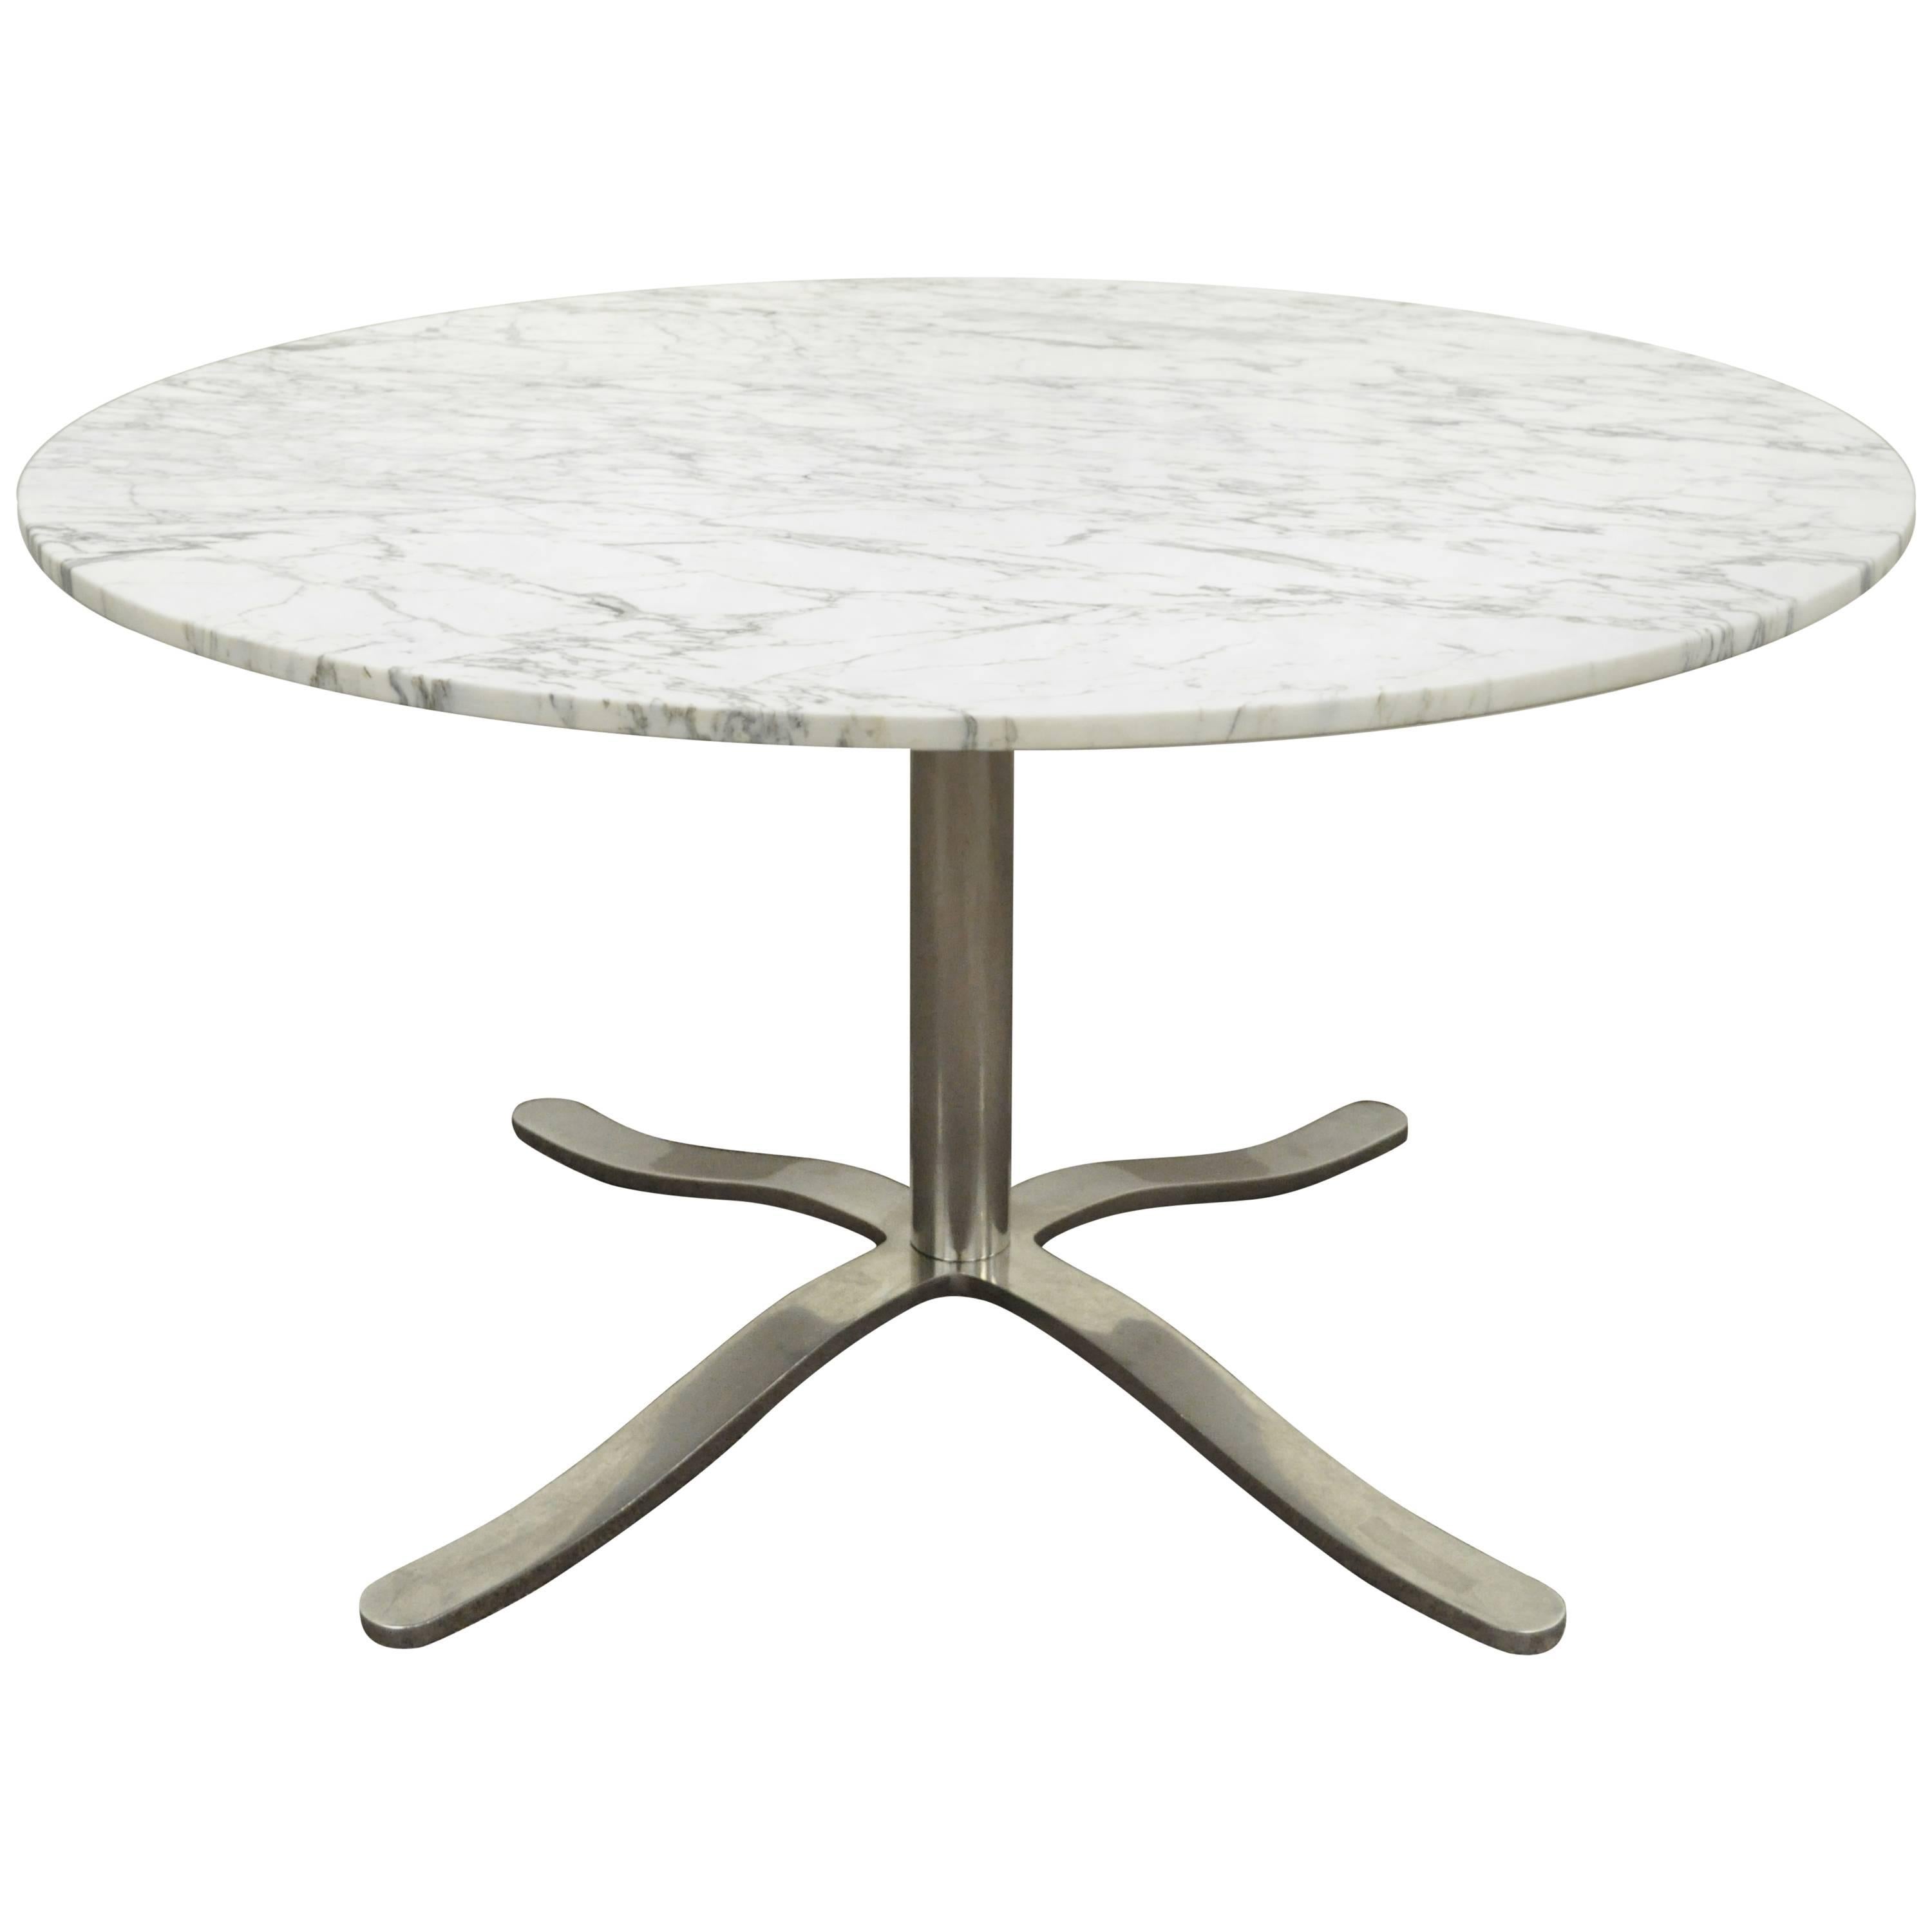 Nicos Zographos Round Marble Top Chrome Steel Pedestal Base Alpha Dining Table